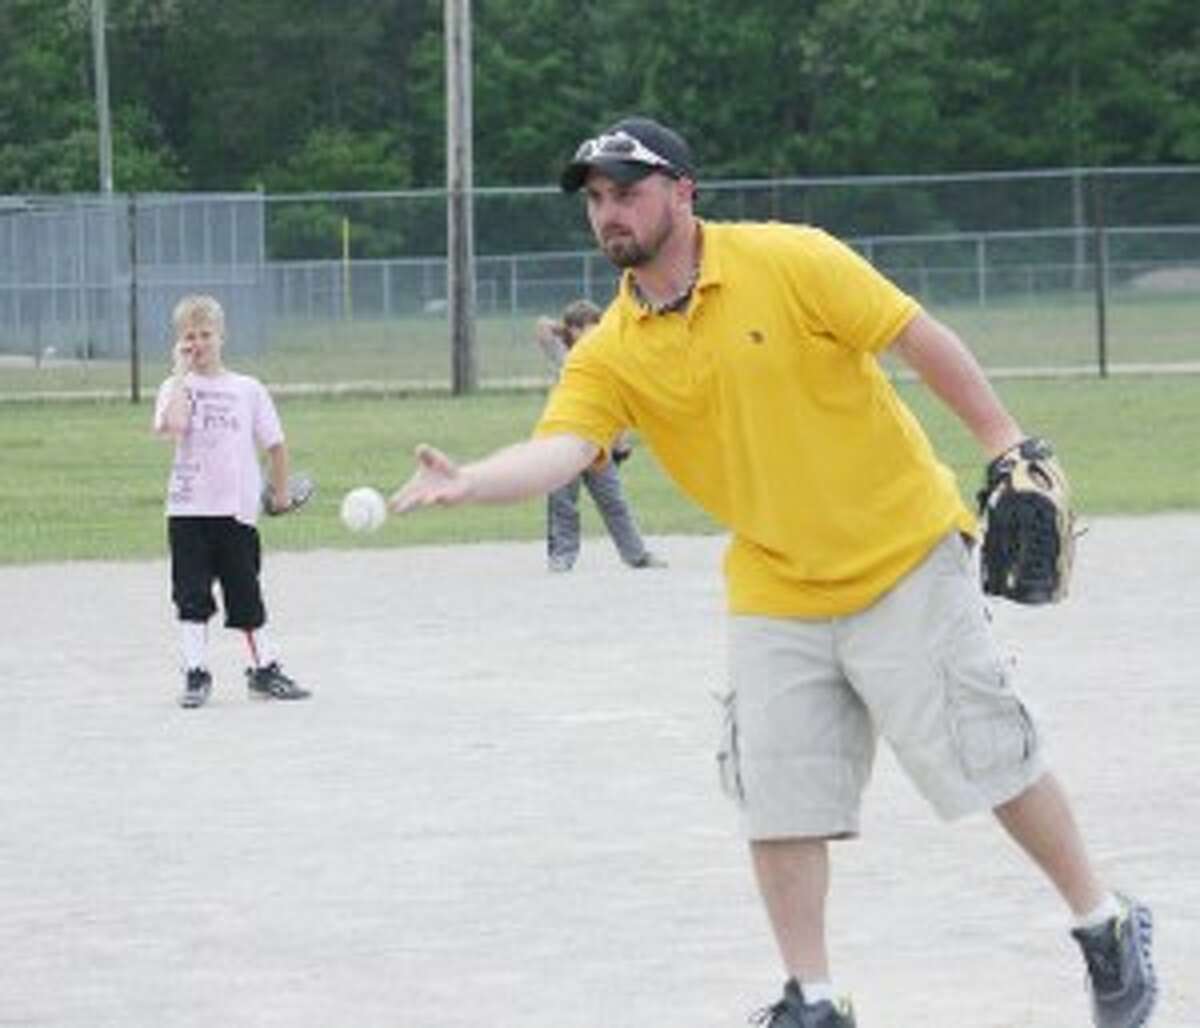 HERE IT COMES: Jason Moore pitches to one of the players Monday during Baldwin Youth League action. (Star/John Raffel)